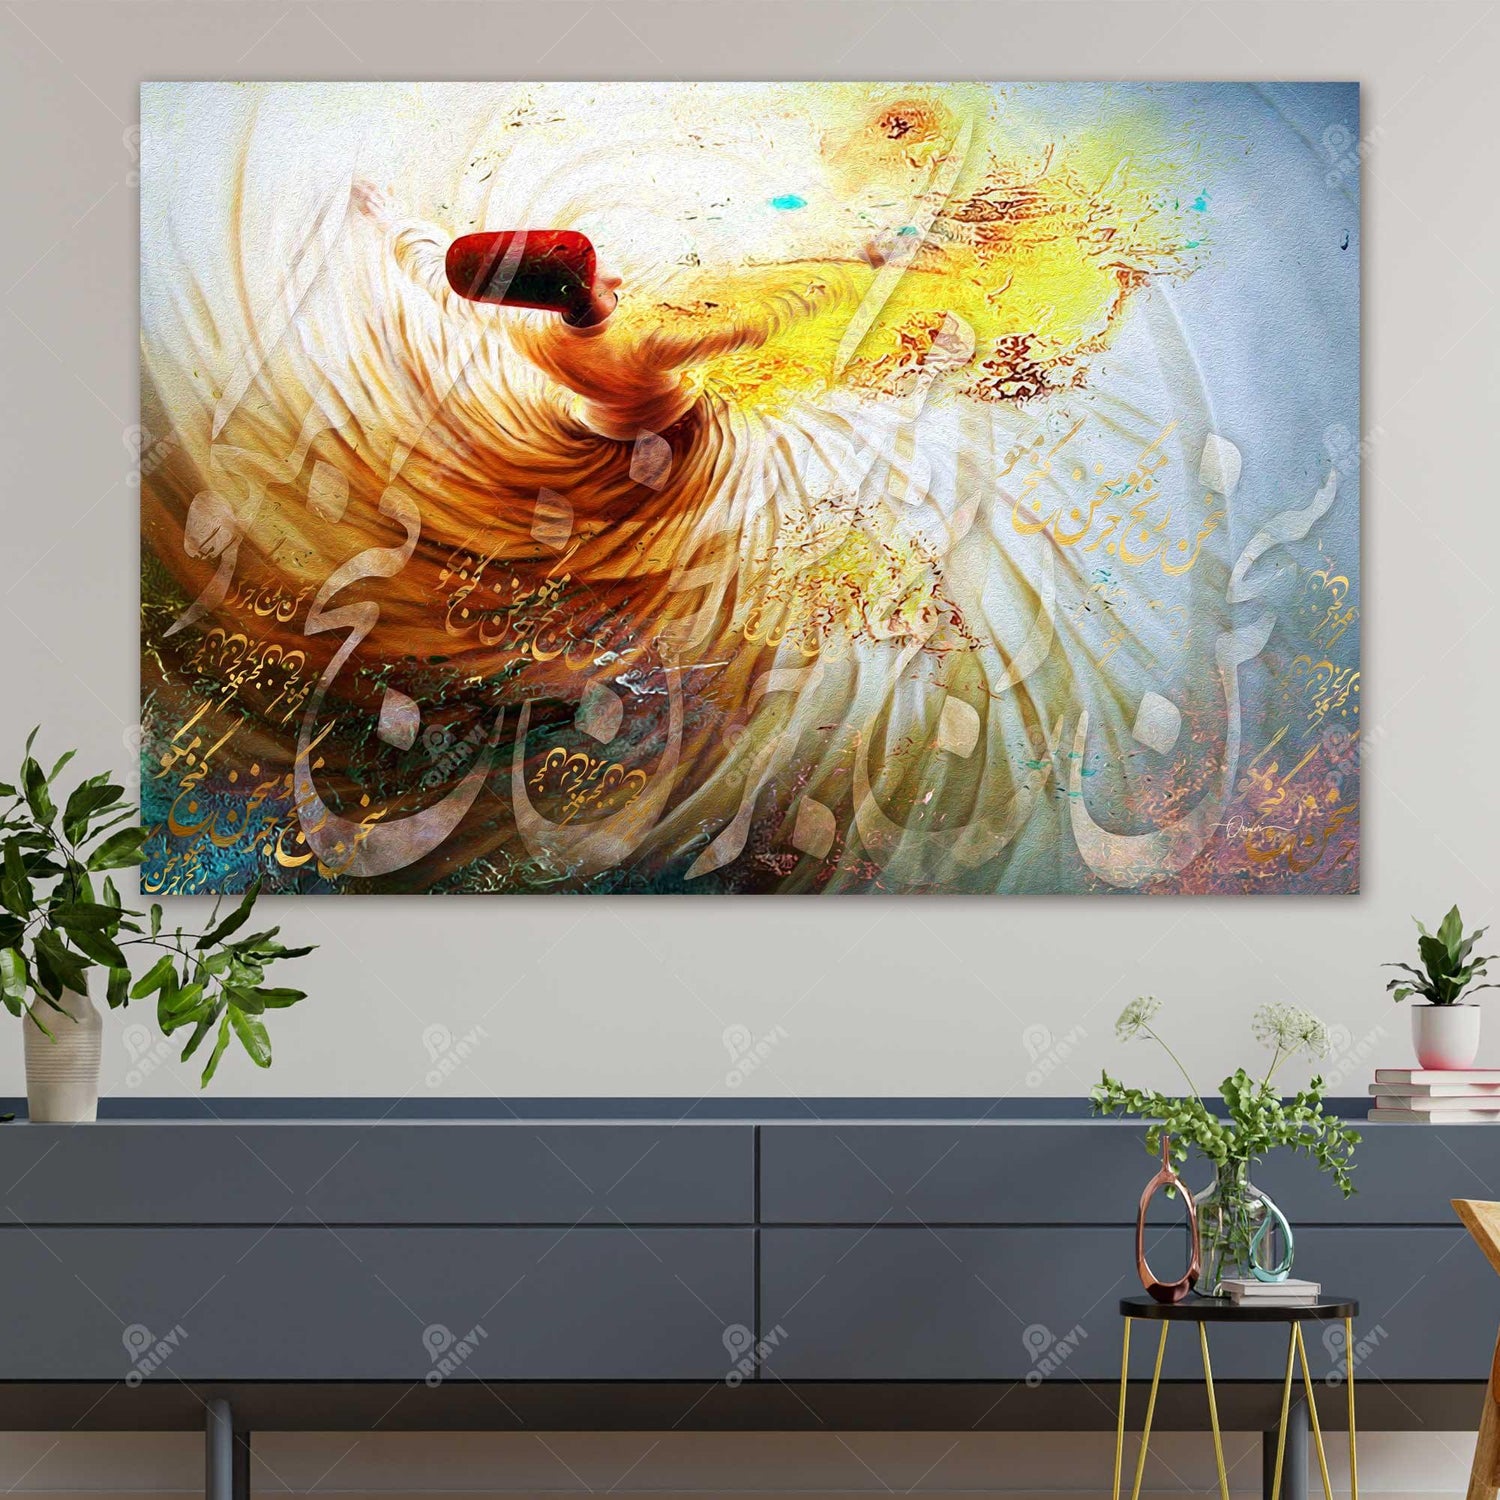 Digital art canvas featuring a Sama dancer in flowing white robes with gold trim against a vibrant background of swirling colors in shades of yellow, red, gold, gray, and turquoise. Persian calligraphy in elegant gold script complements the artwork, featuring a timeless poem by Rumi.